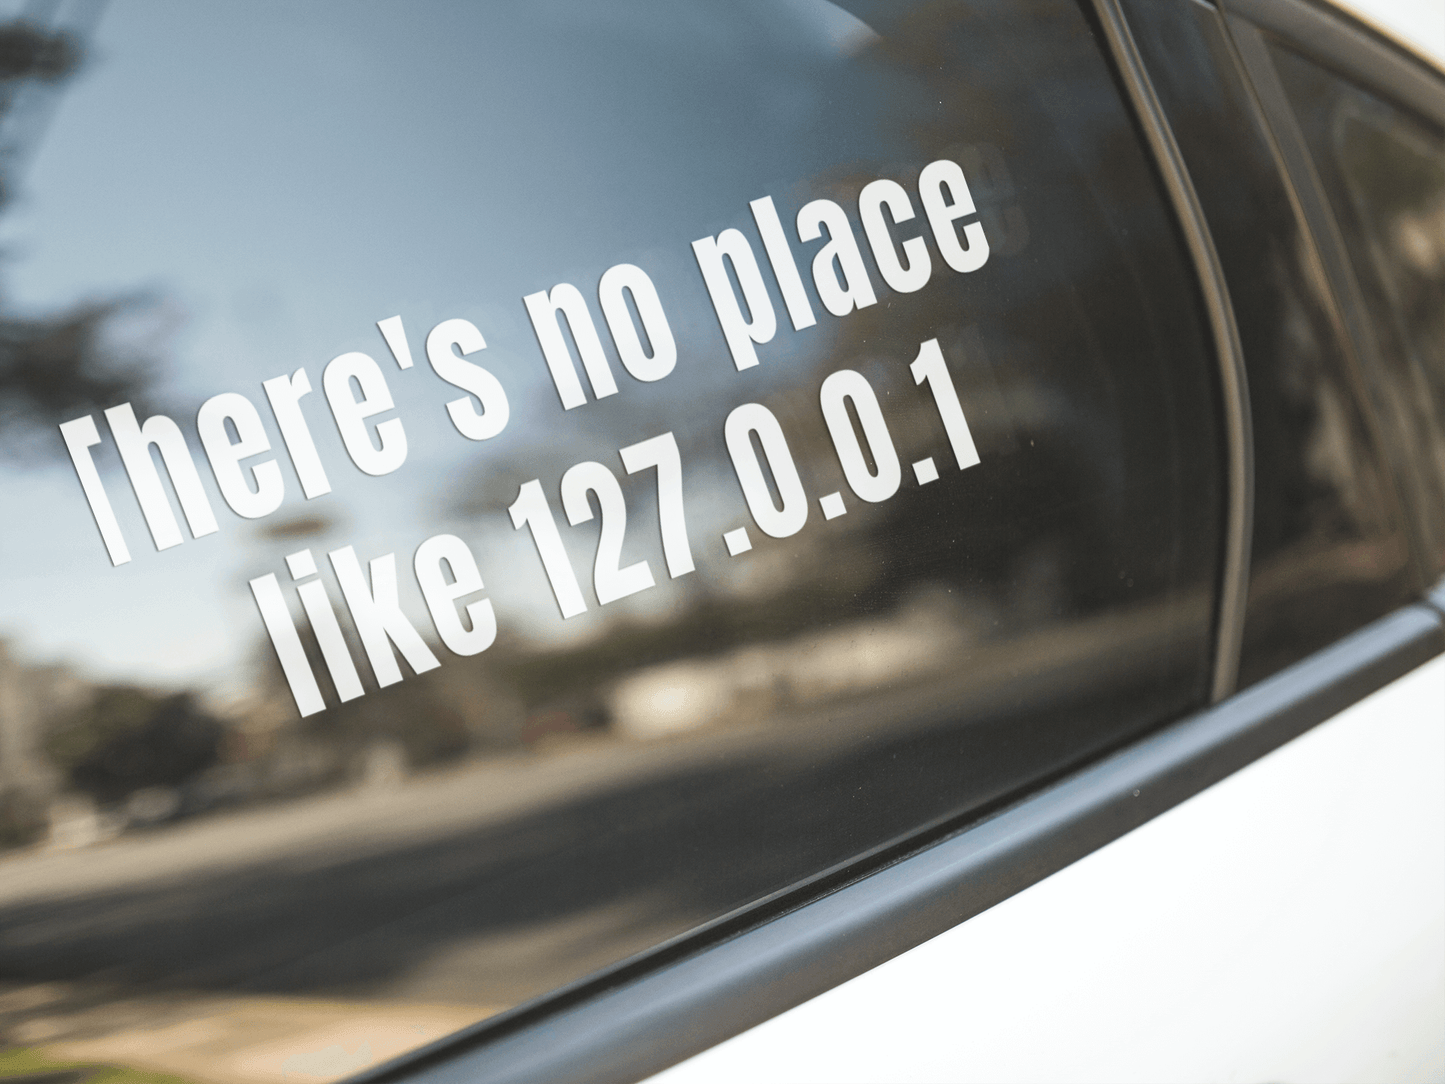 There is no place like 127.0.0.1- Vinyl Sticker